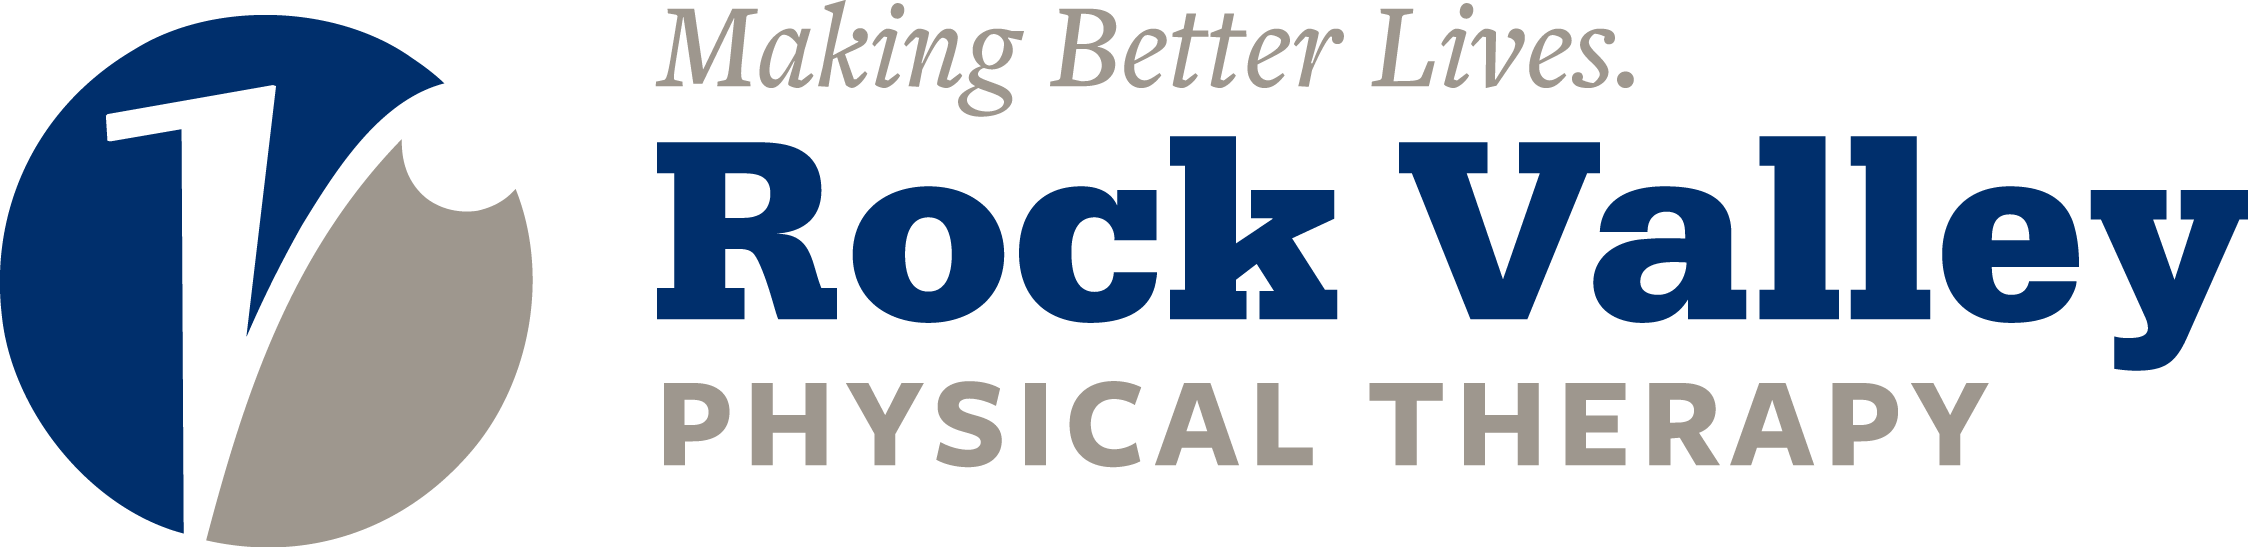 Rock Valley Physical Therapy Company Logo